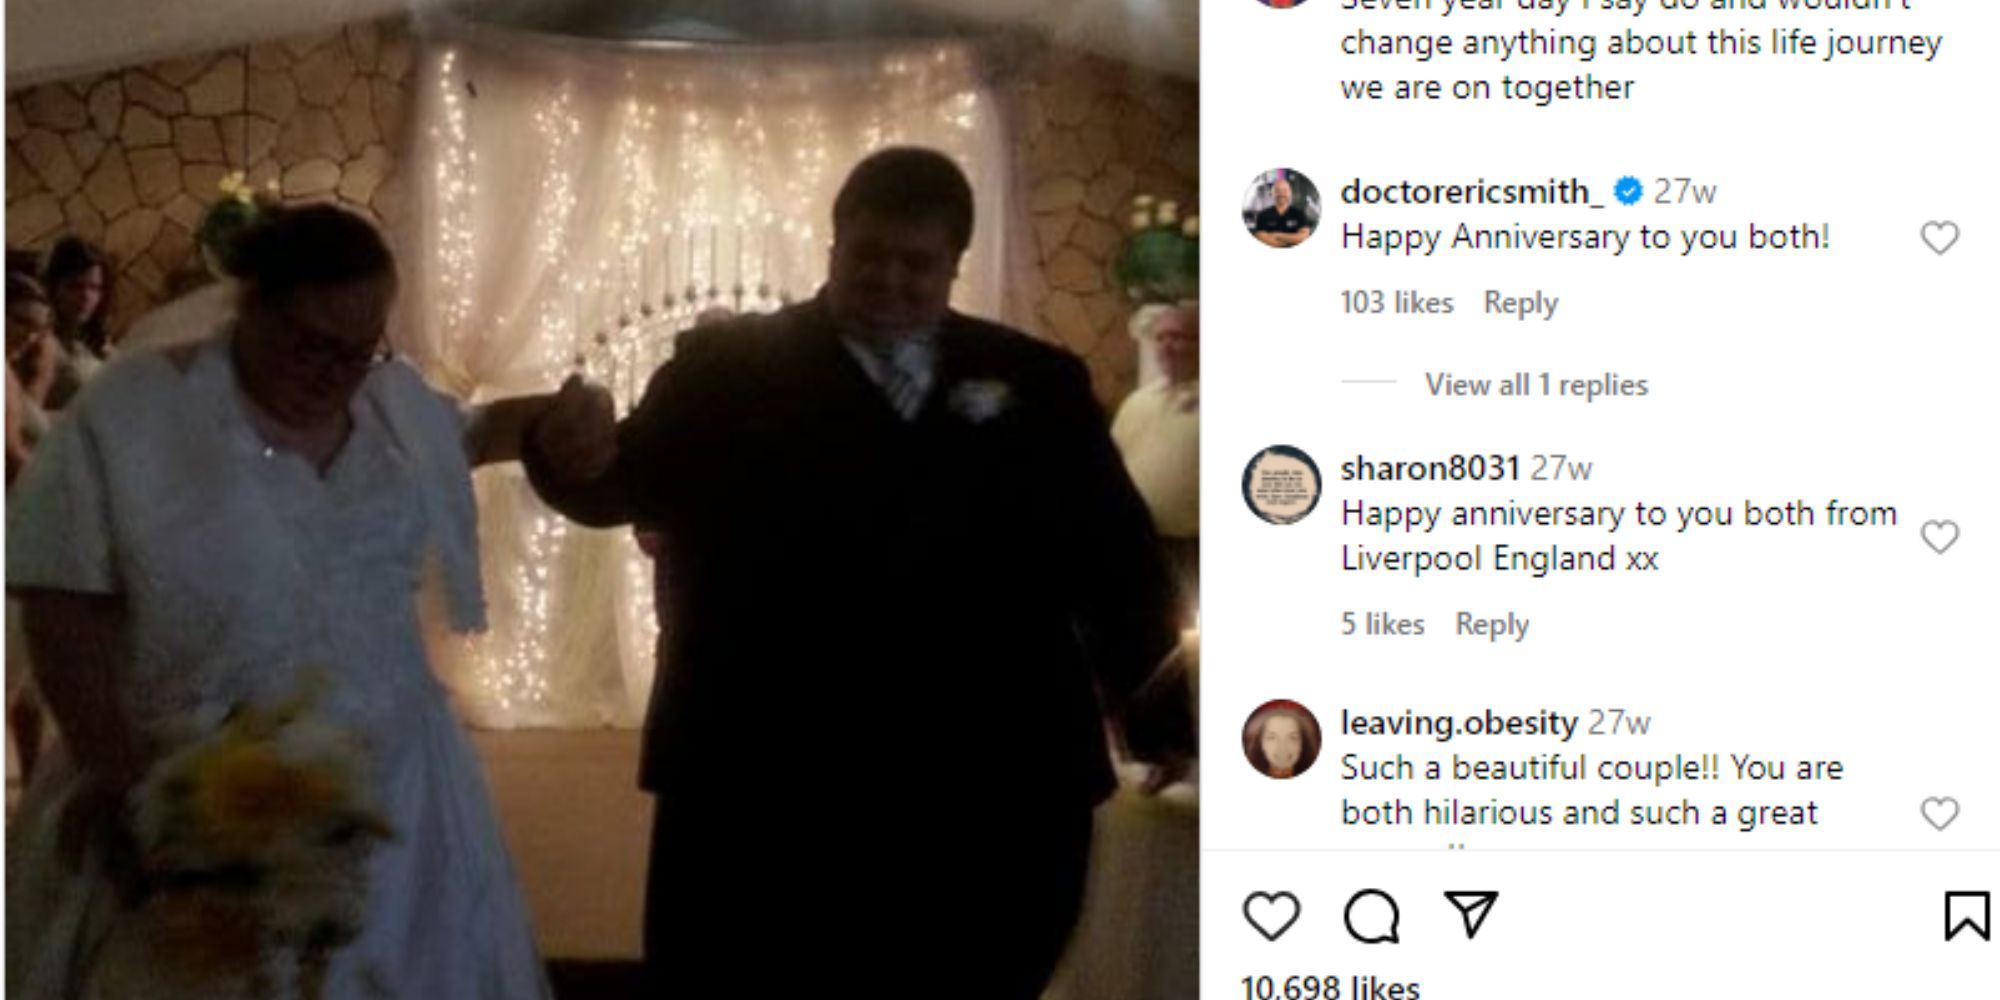 1000-lb sisters Chris Combs & Brittany Combs in wedding attire, holding hands at their wedding